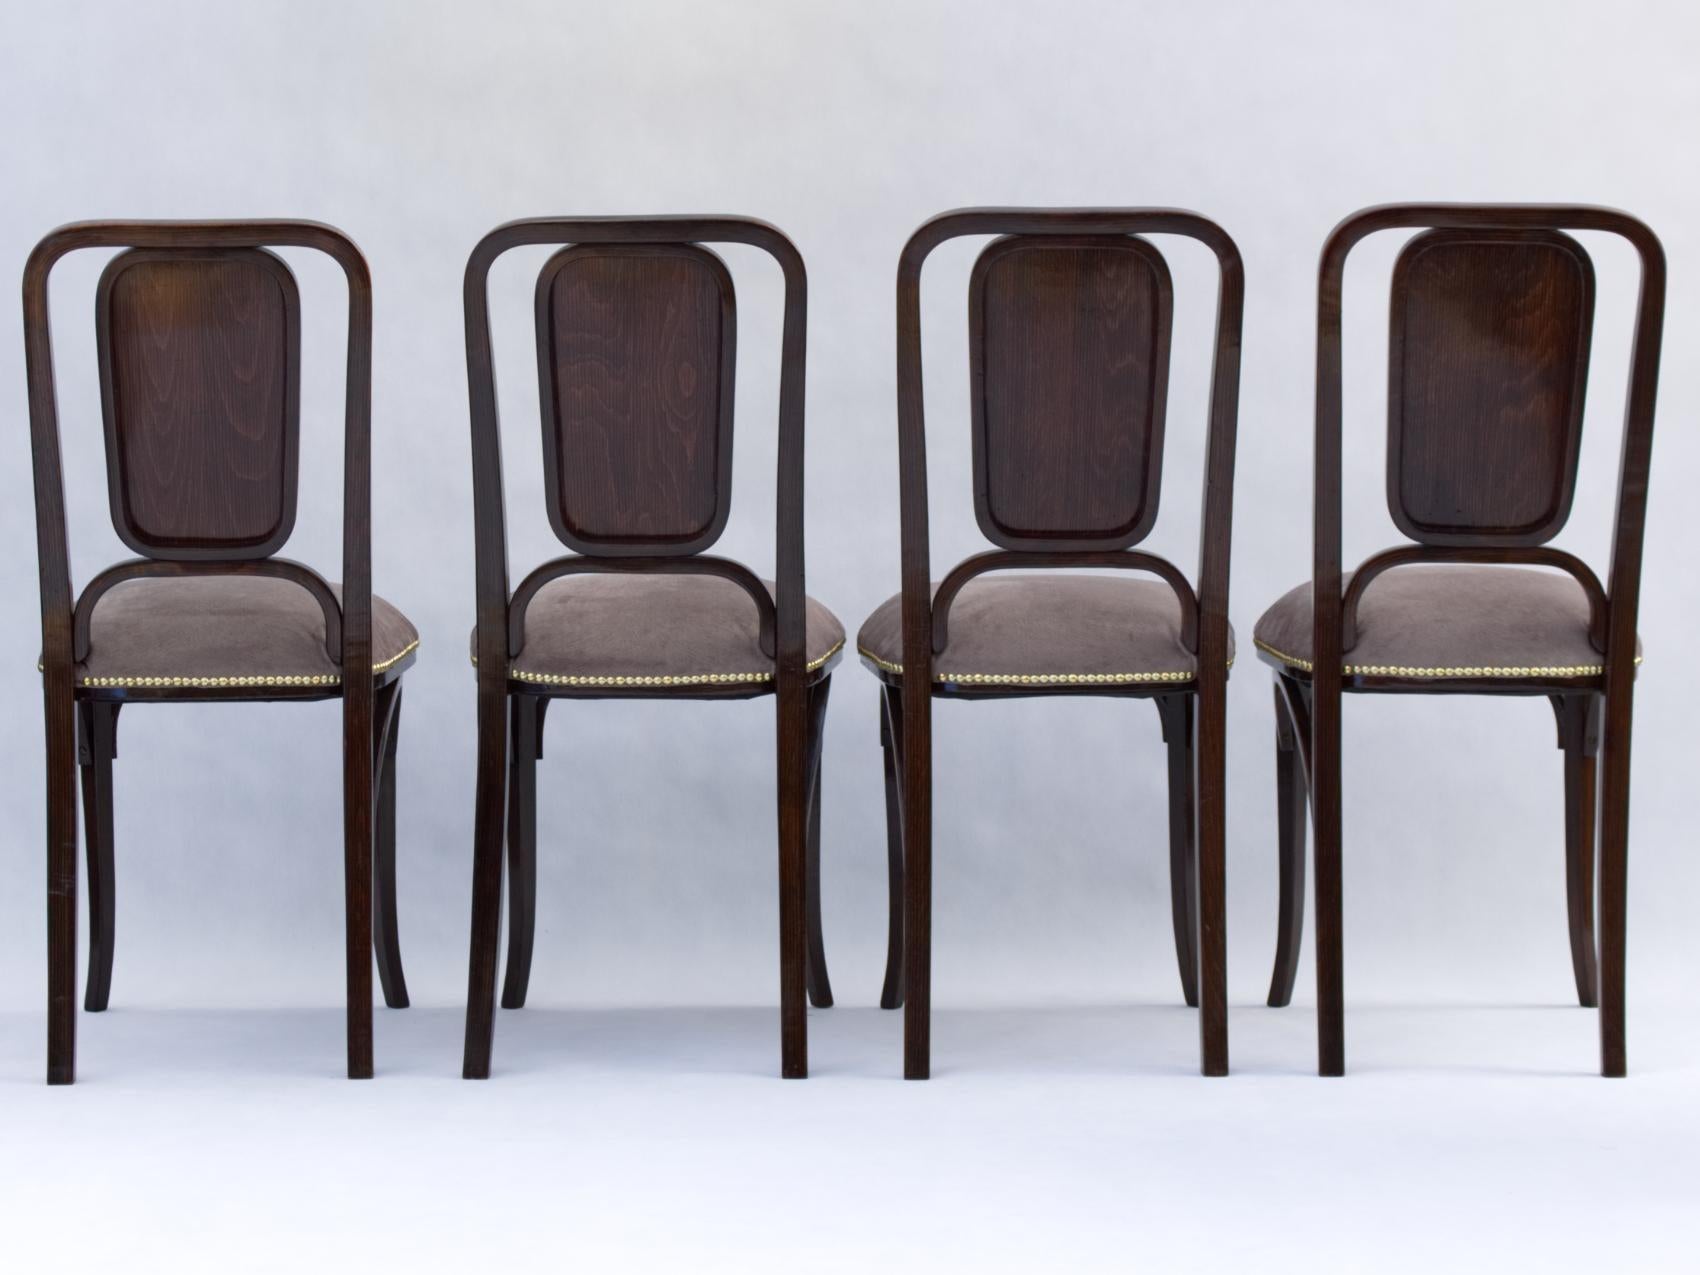 This beautiful set of 4 chairs from the Vienna Secession period was completely restored - refinished and reupholstered. It will uplift any dining room or tea room.